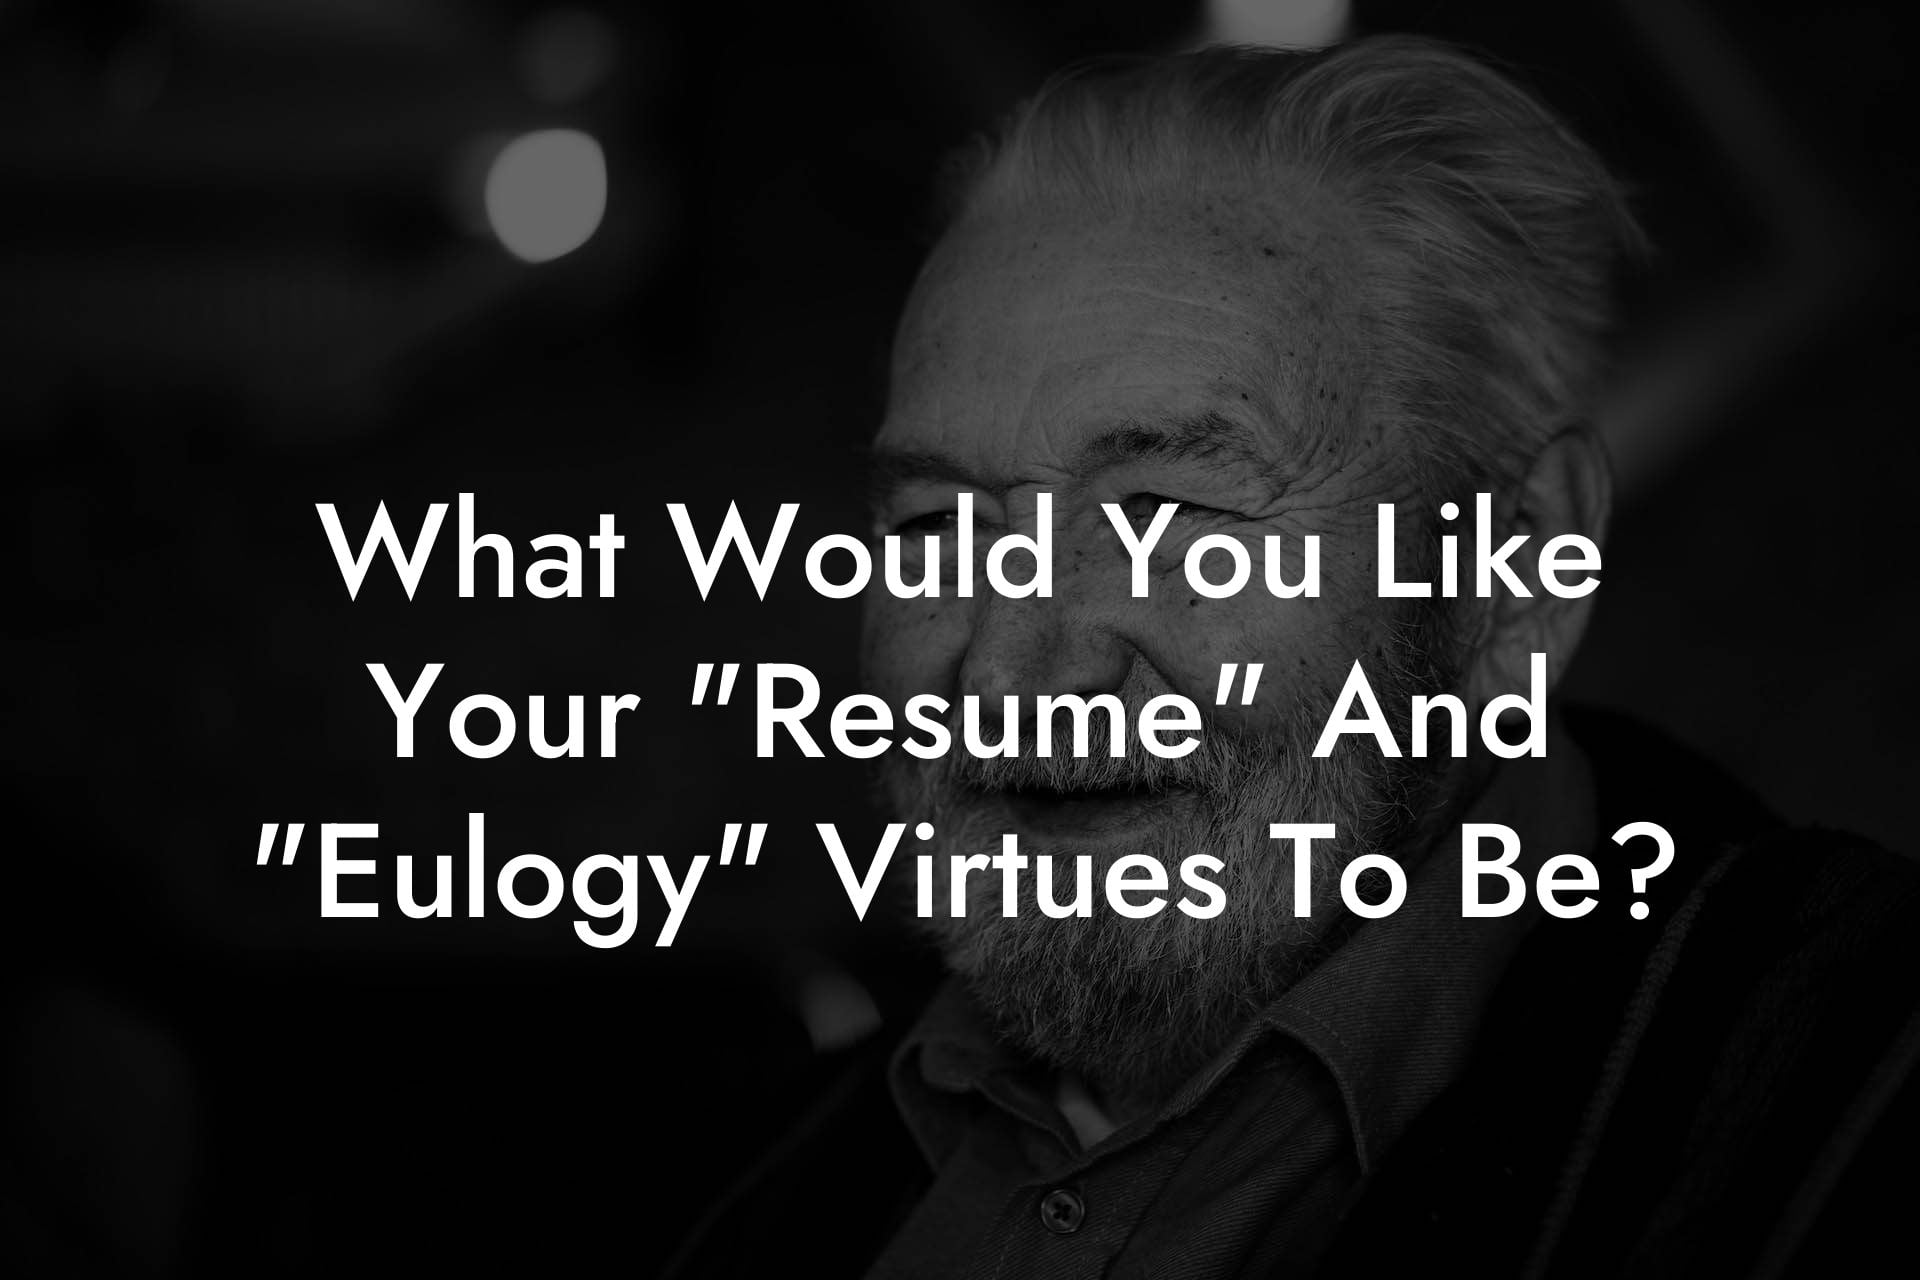 What Would You Like Your "Resume" And "Eulogy" Virtues To Be?